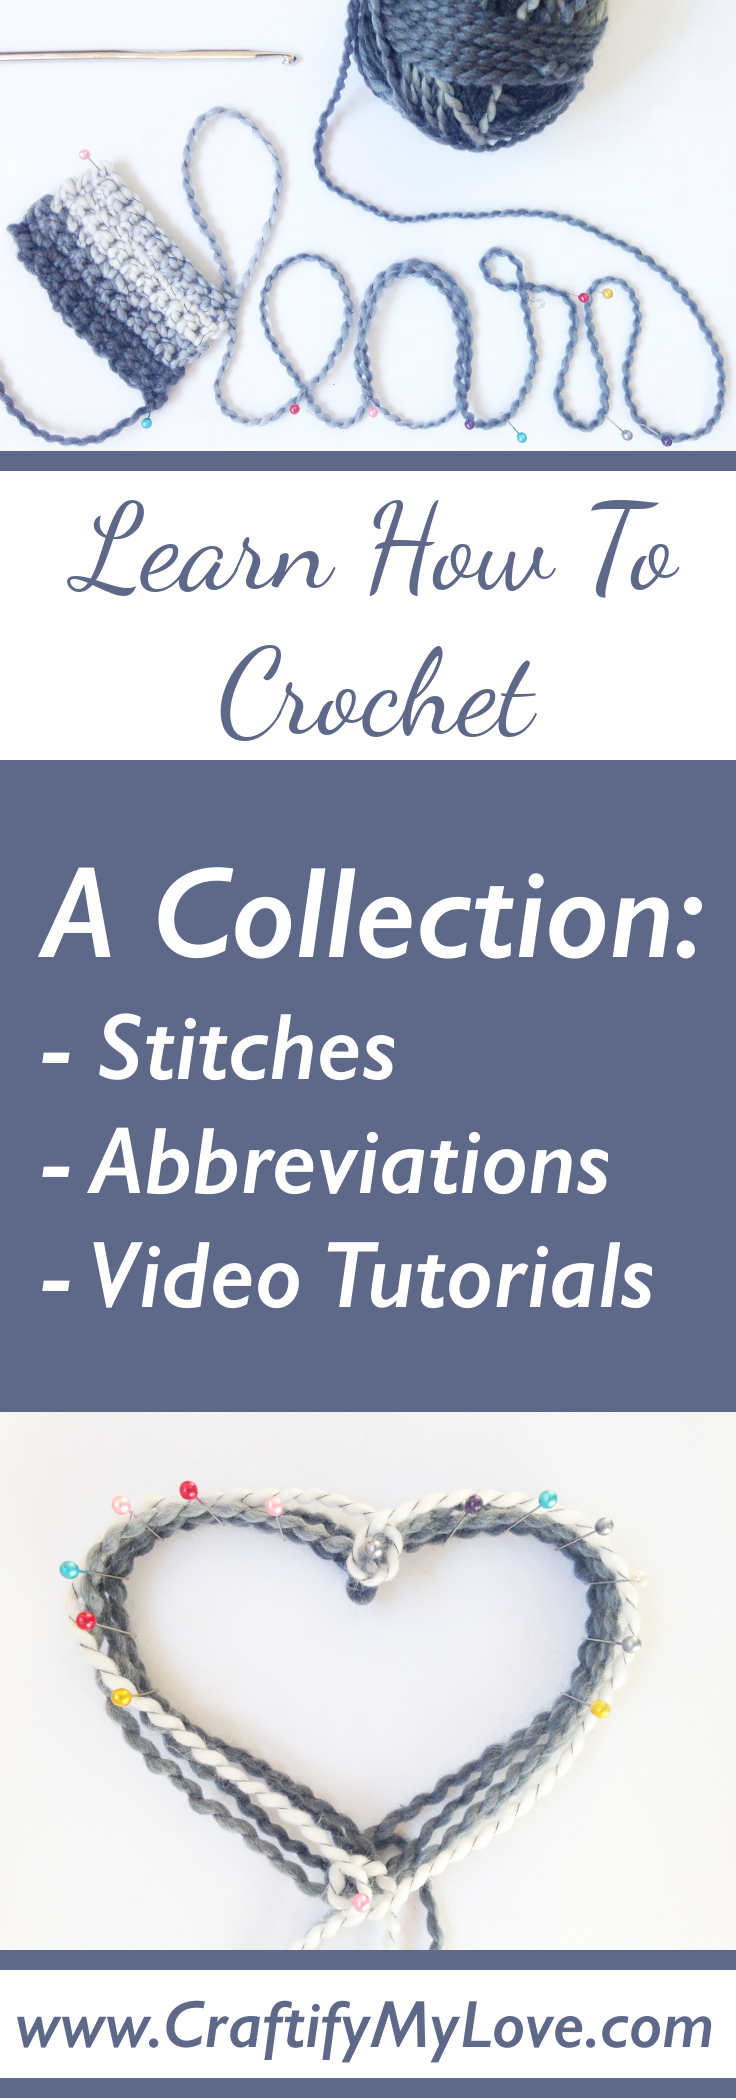 Learn how to crochet, a collection of Stitches, abbreviations, and video tutorials curated by Habiba from CraftifyMyLove.com